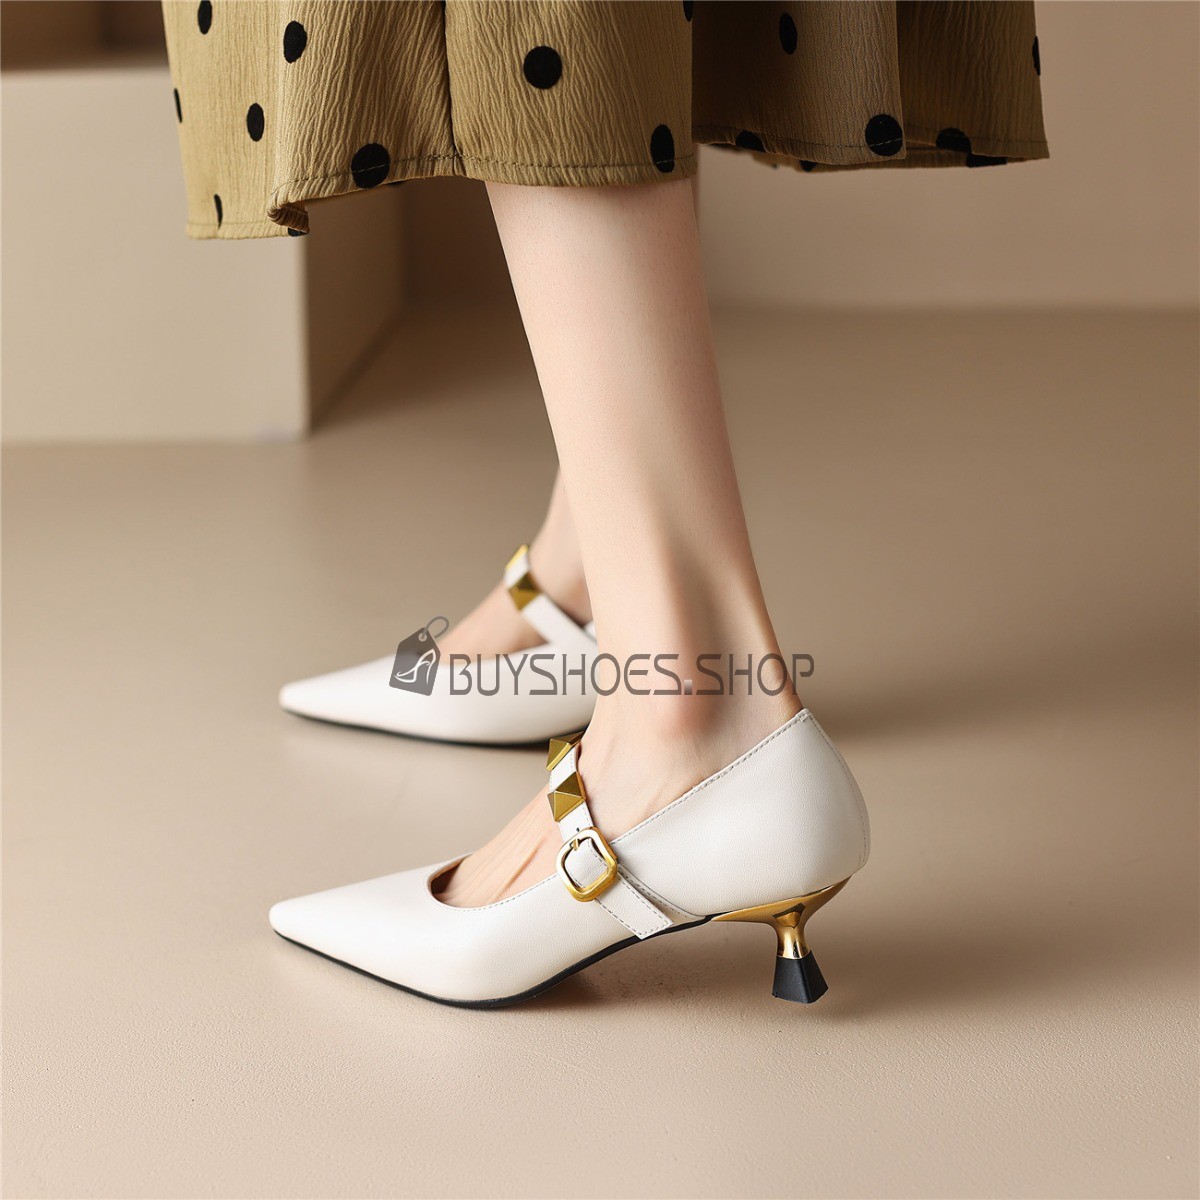 Dressy Shoes Belt Buckle Pointed Toe Beautiful Low Heels Studded Pumps  Stiletto Business Casual With Ankle Strap